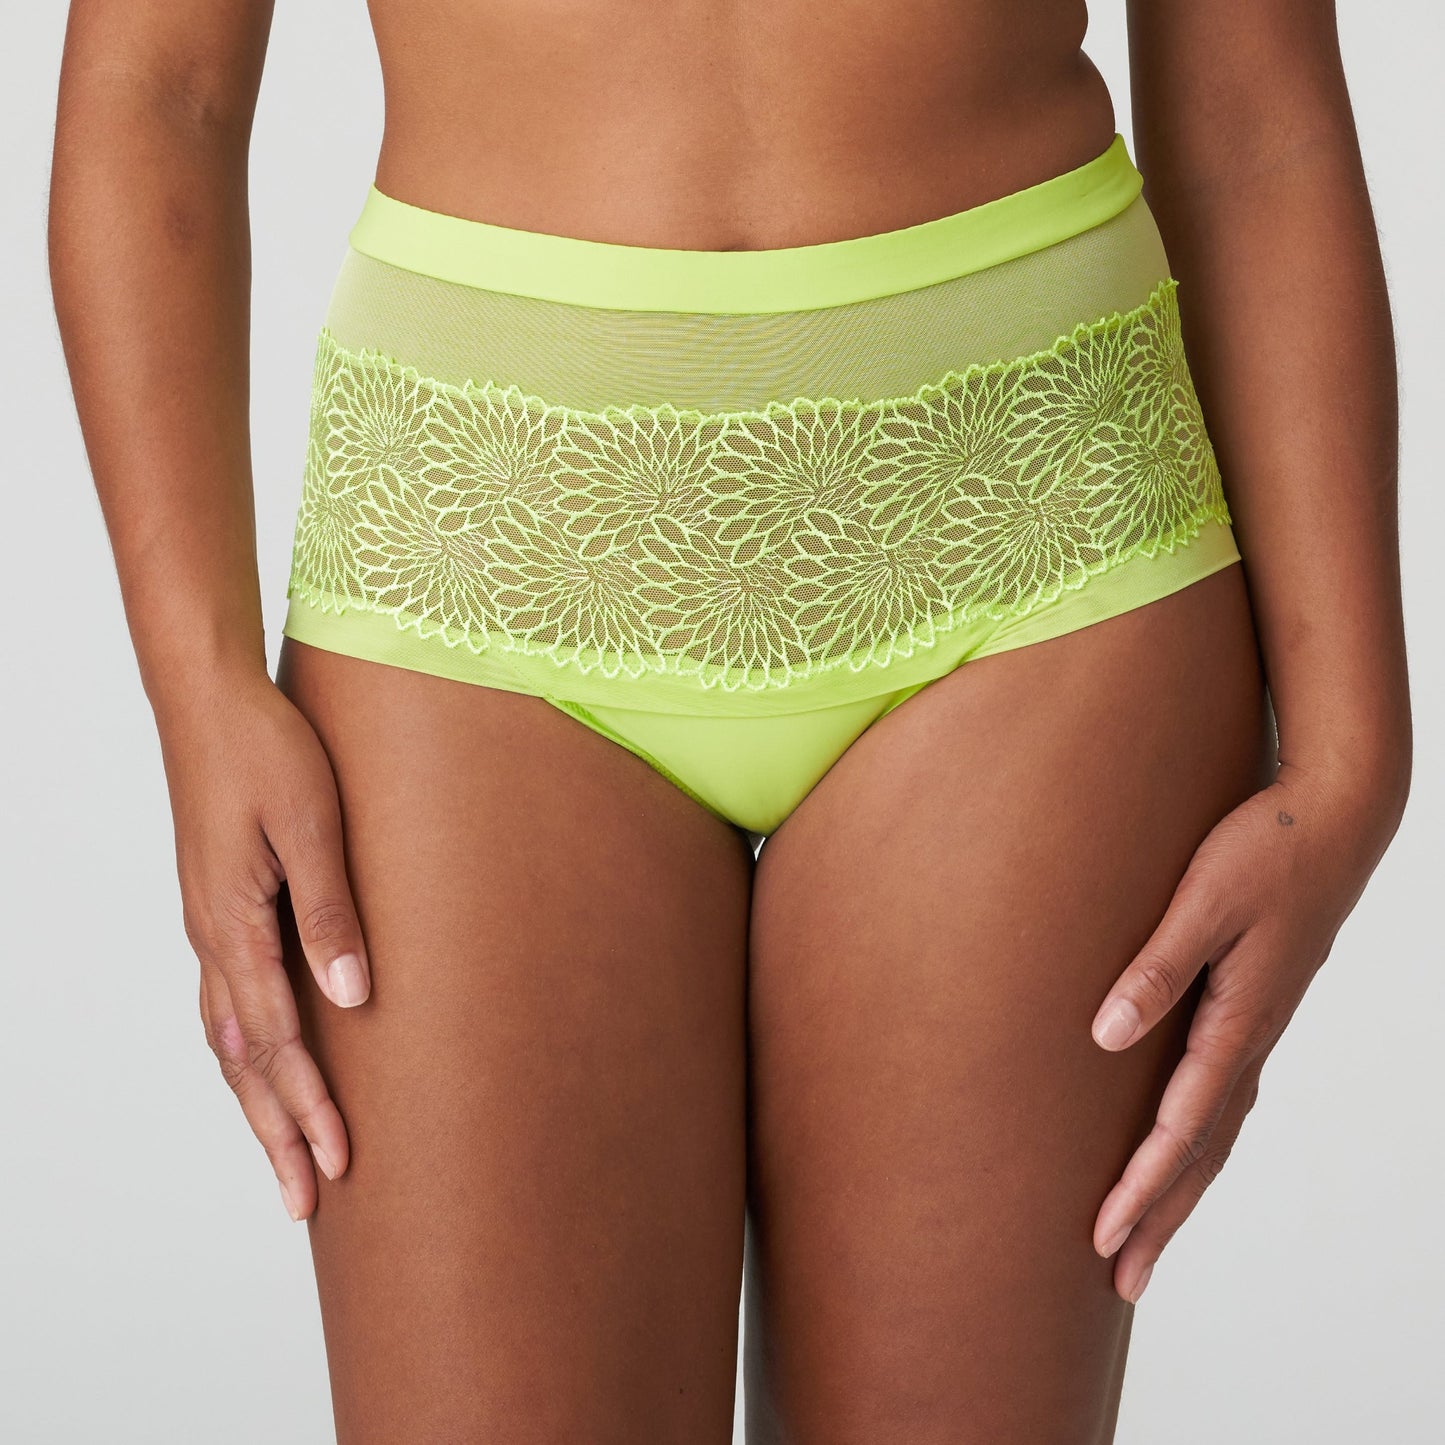 Front view of a woman wearing the Sophora high-waisted cheeky panty in Lime Crush by PrimaDonna.